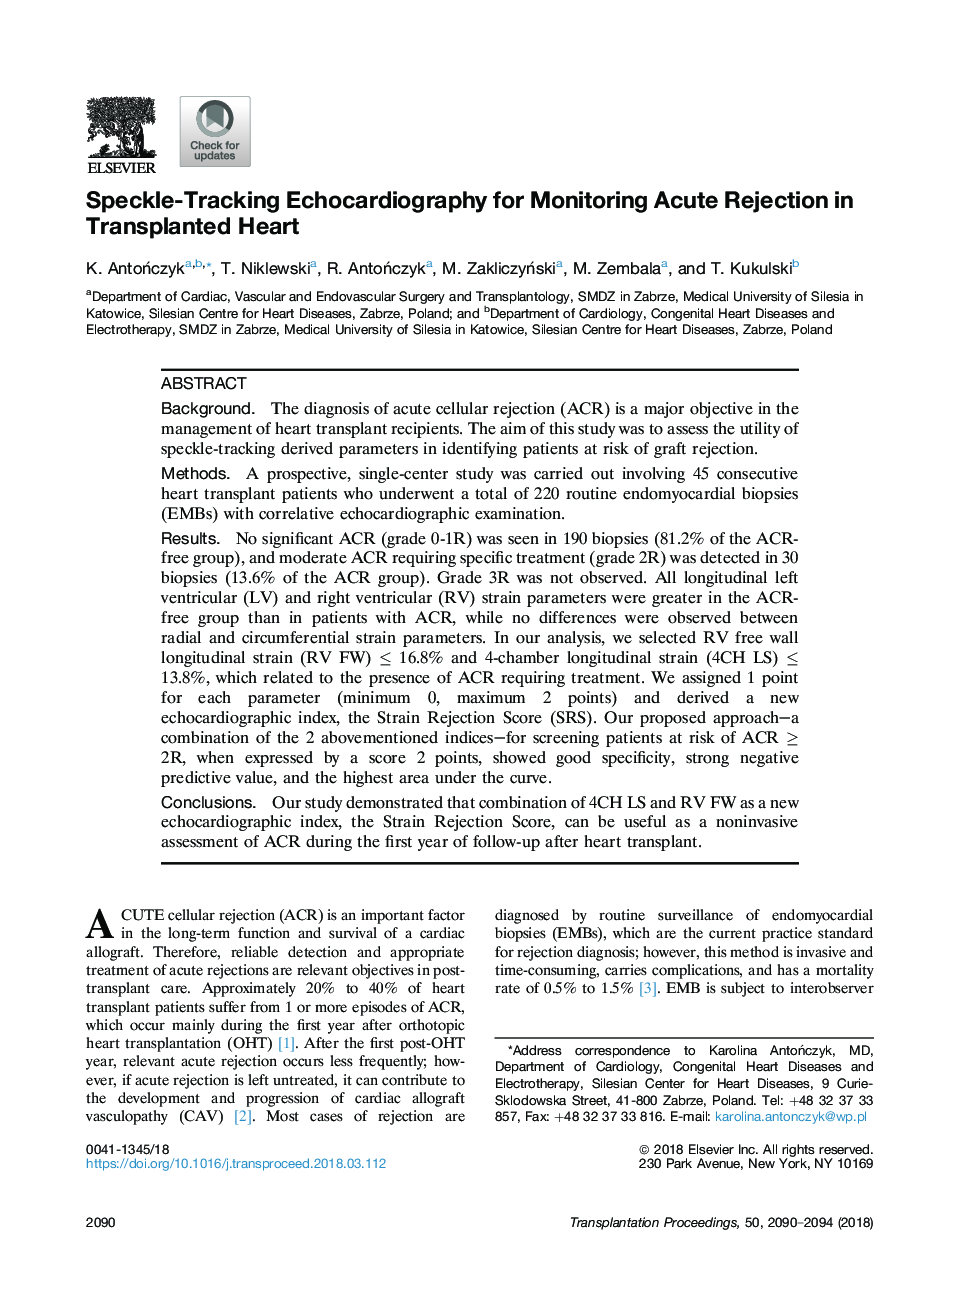 Speckle-Tracking Echocardiography for Monitoring Acute Rejection in Transplanted Heart